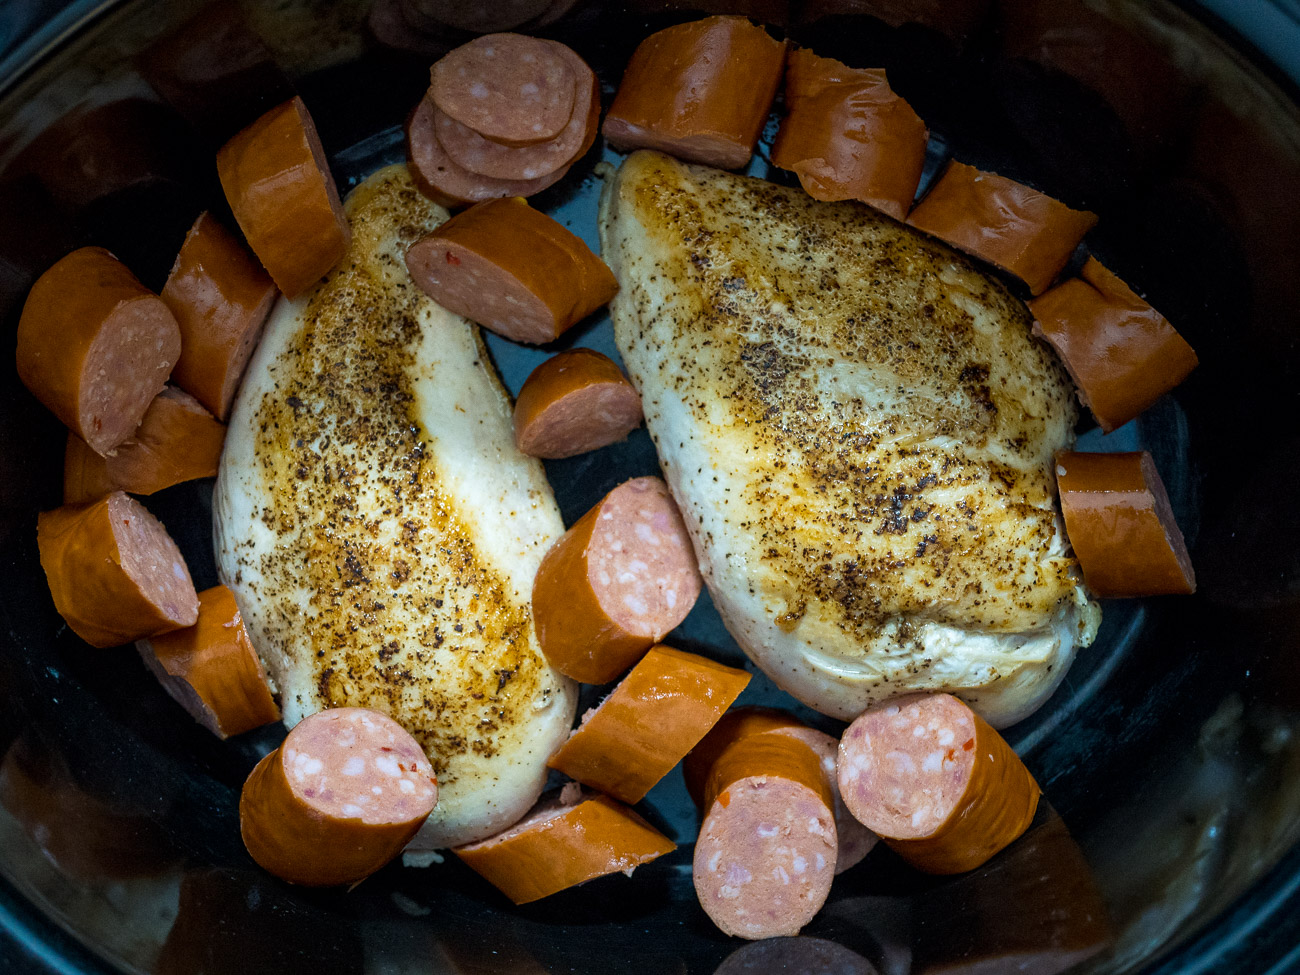 Place chicken breasts in the slow cooker, along with sausage, heavy cream, chicken broth, butter, garlic cloves, cajun seasoning, and a sprinkle of salt & pepper.